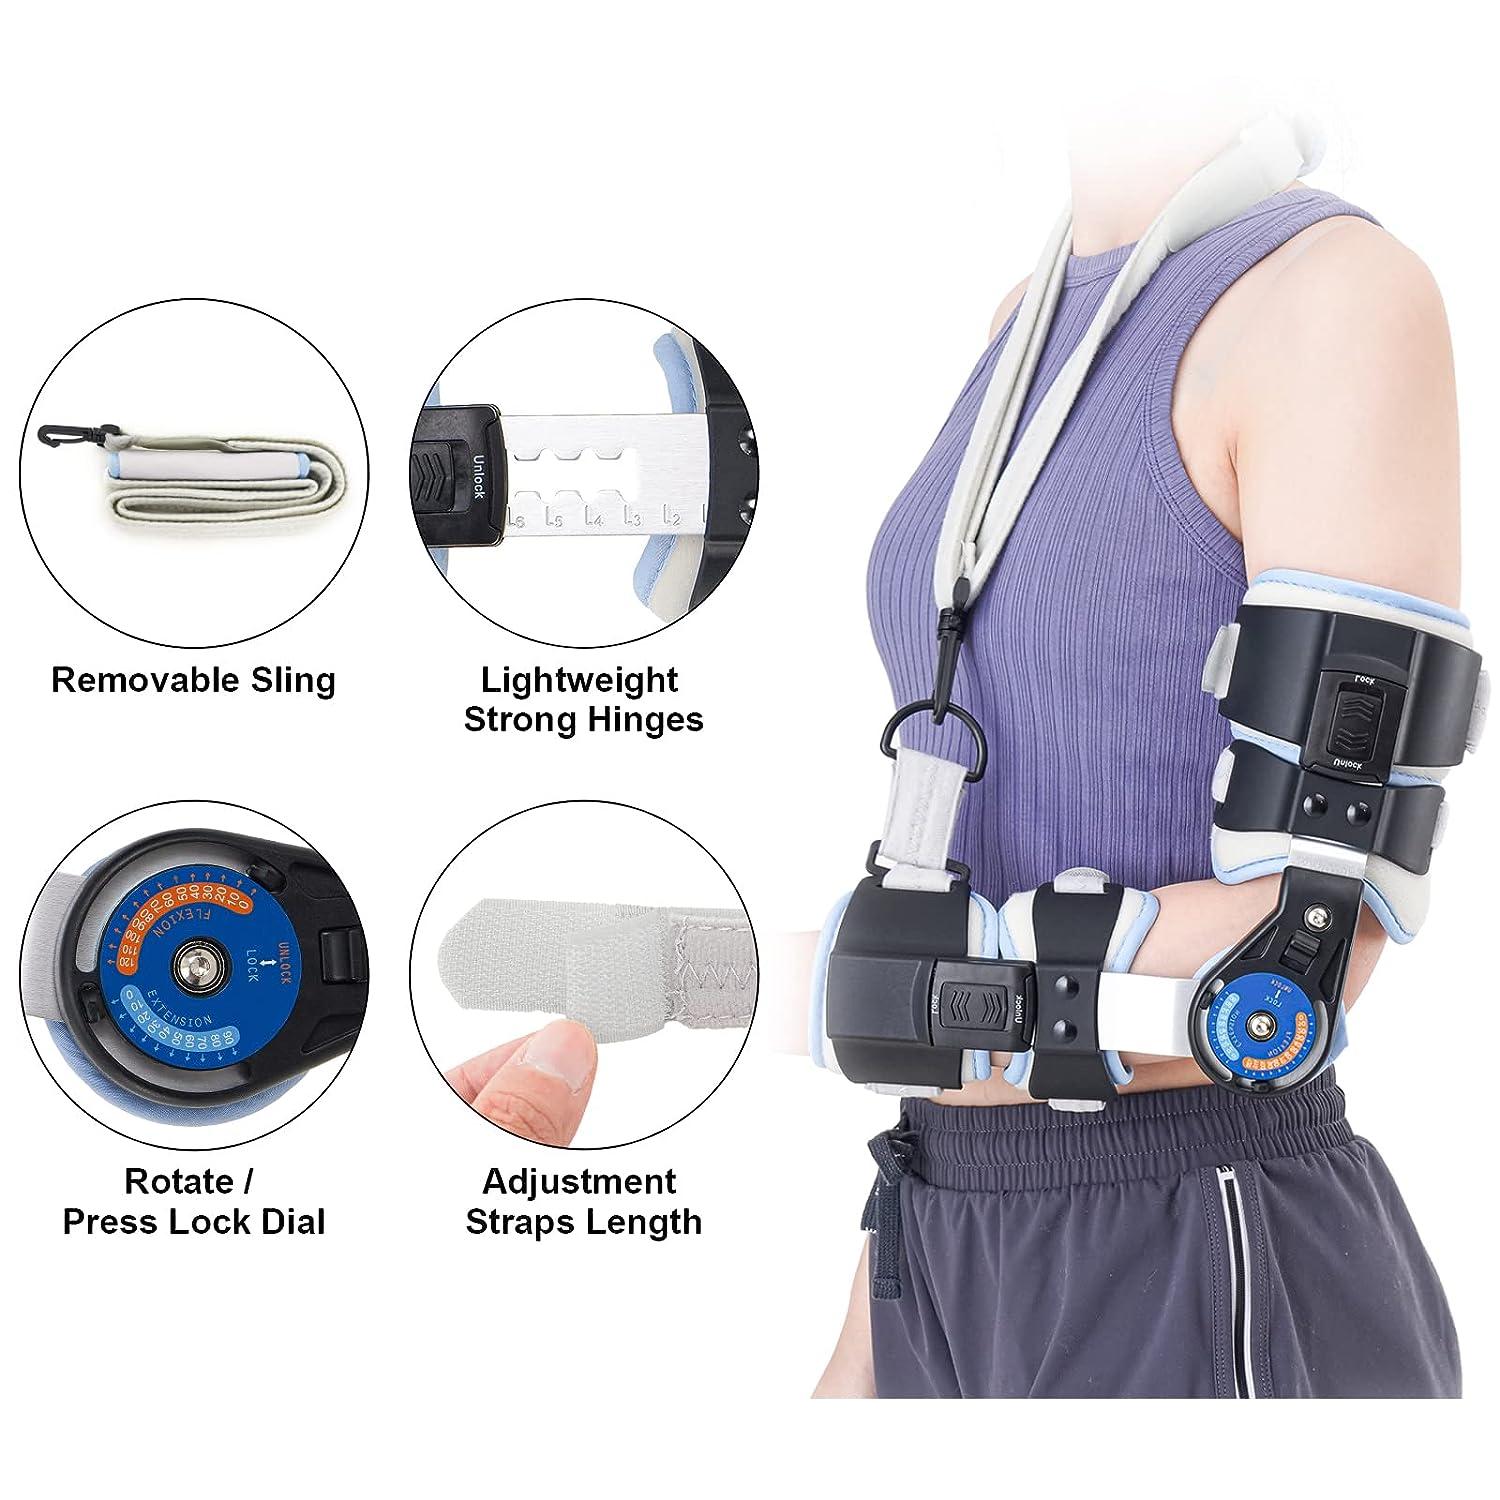 RISURRY Hinged Elbow Brace Adjustable Post OP Elbow Brace with Shoulder  Sling Stabilizer Splint Arm Injury Recovery Support After Surgery (Left Arm)  Universal-Left